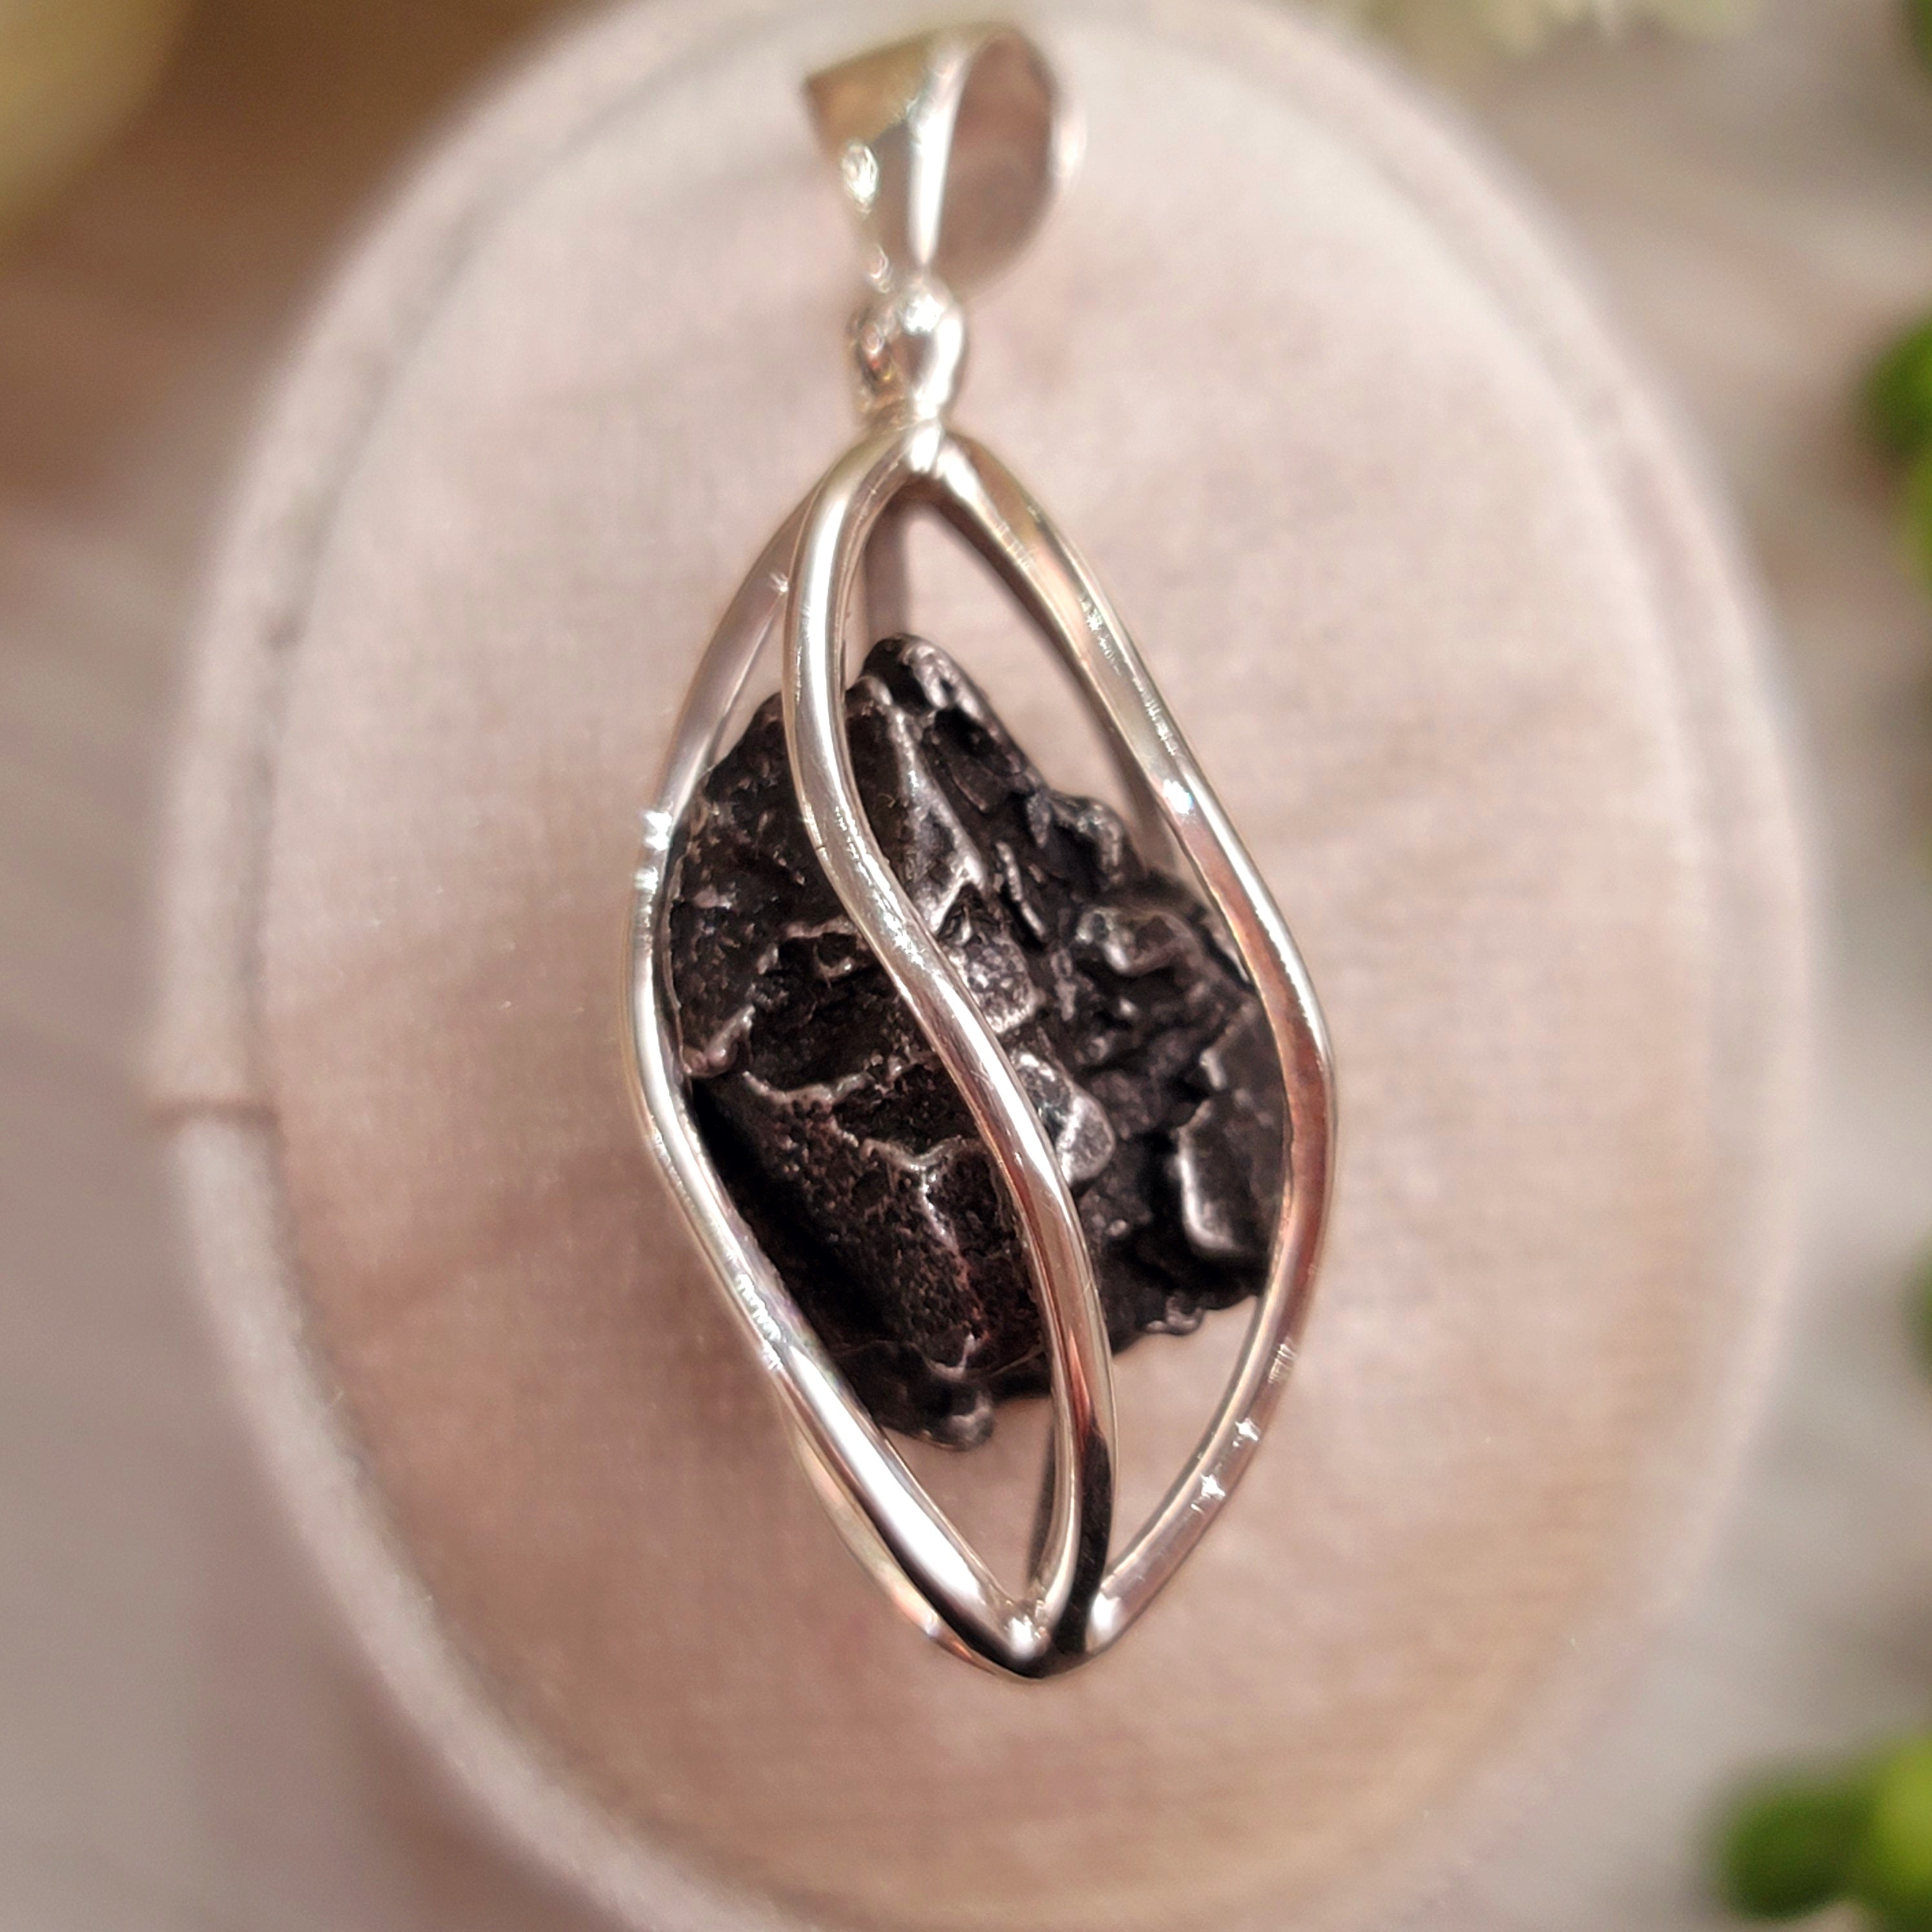 Meteorite Specimen Pendant .925 Silver for Strengthening Solar Energy Within and Positive Life Force Energy.